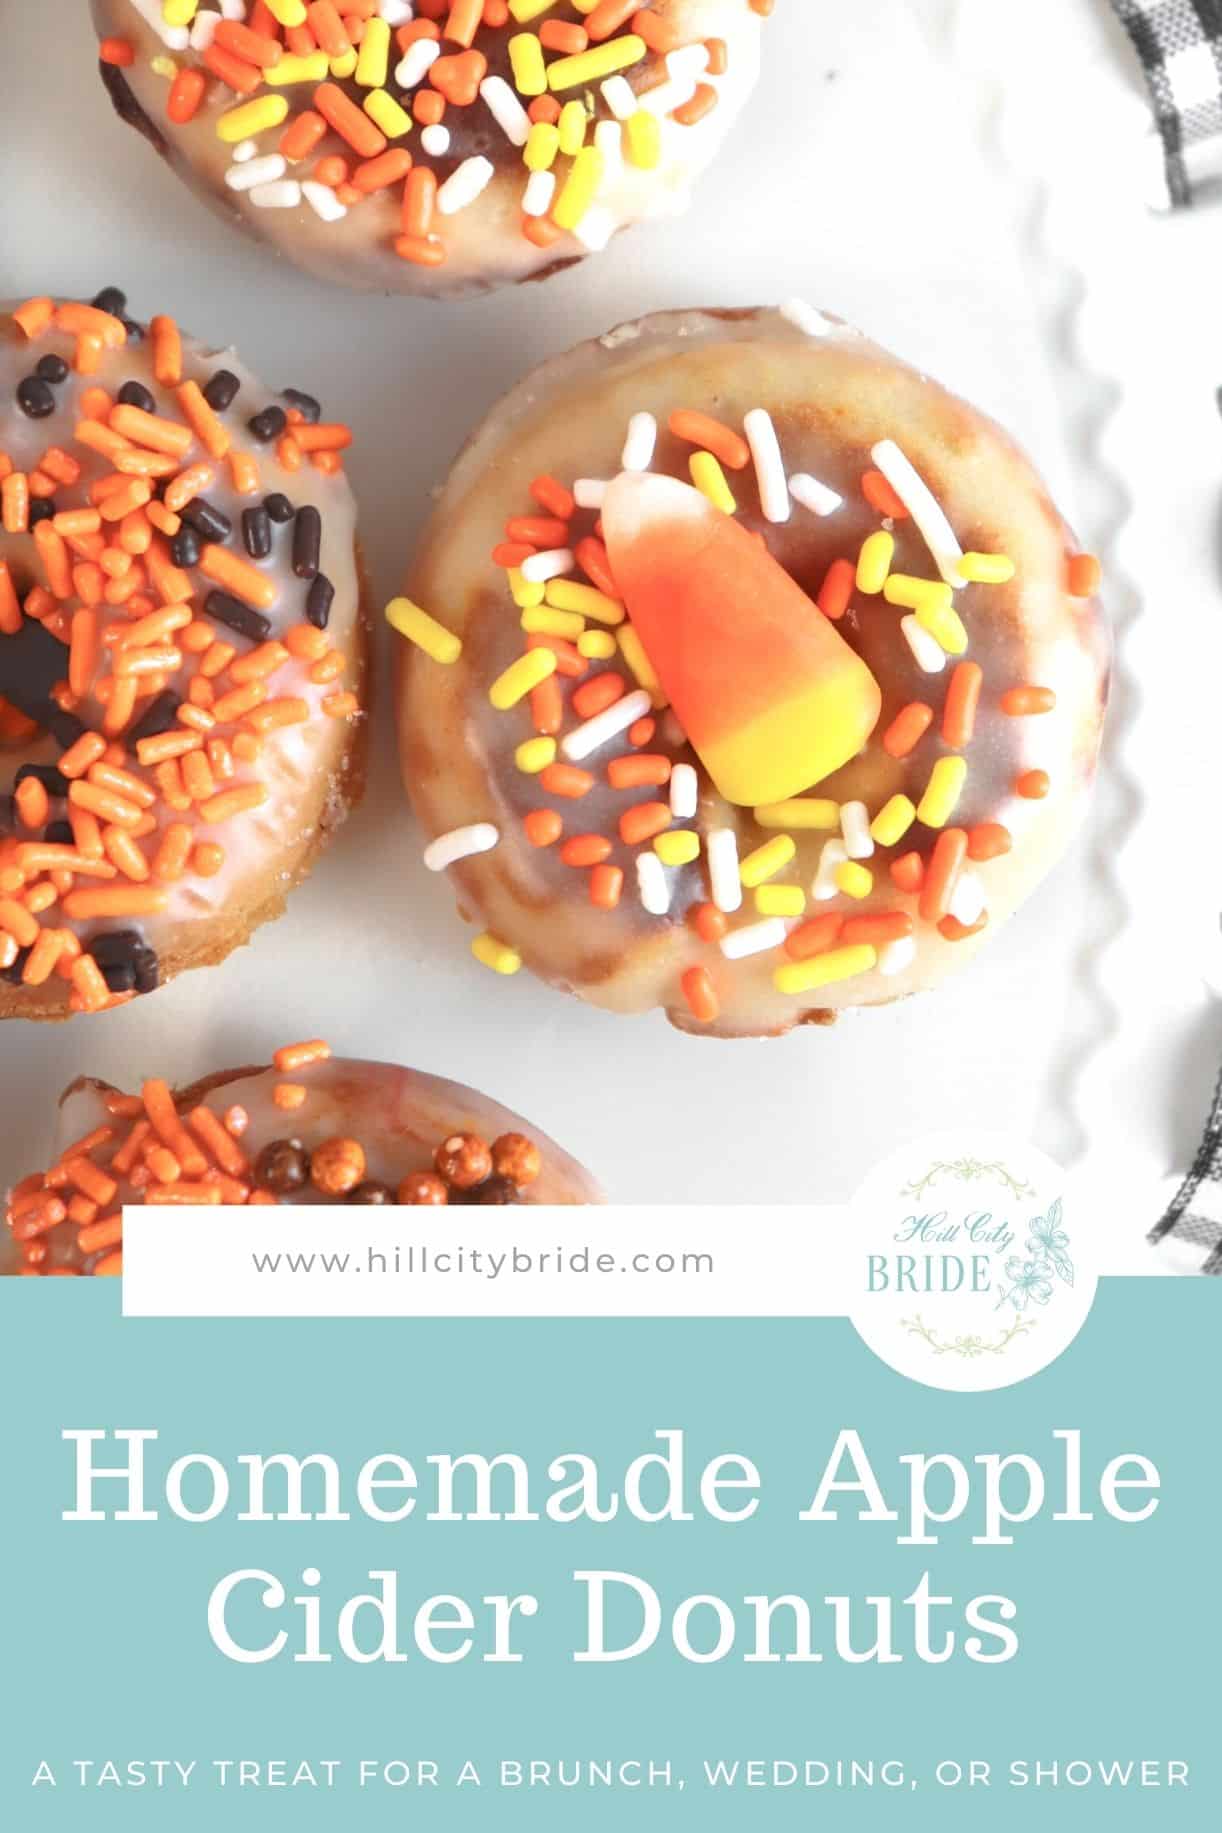 How to Make Homemade Apple Cider Donuts